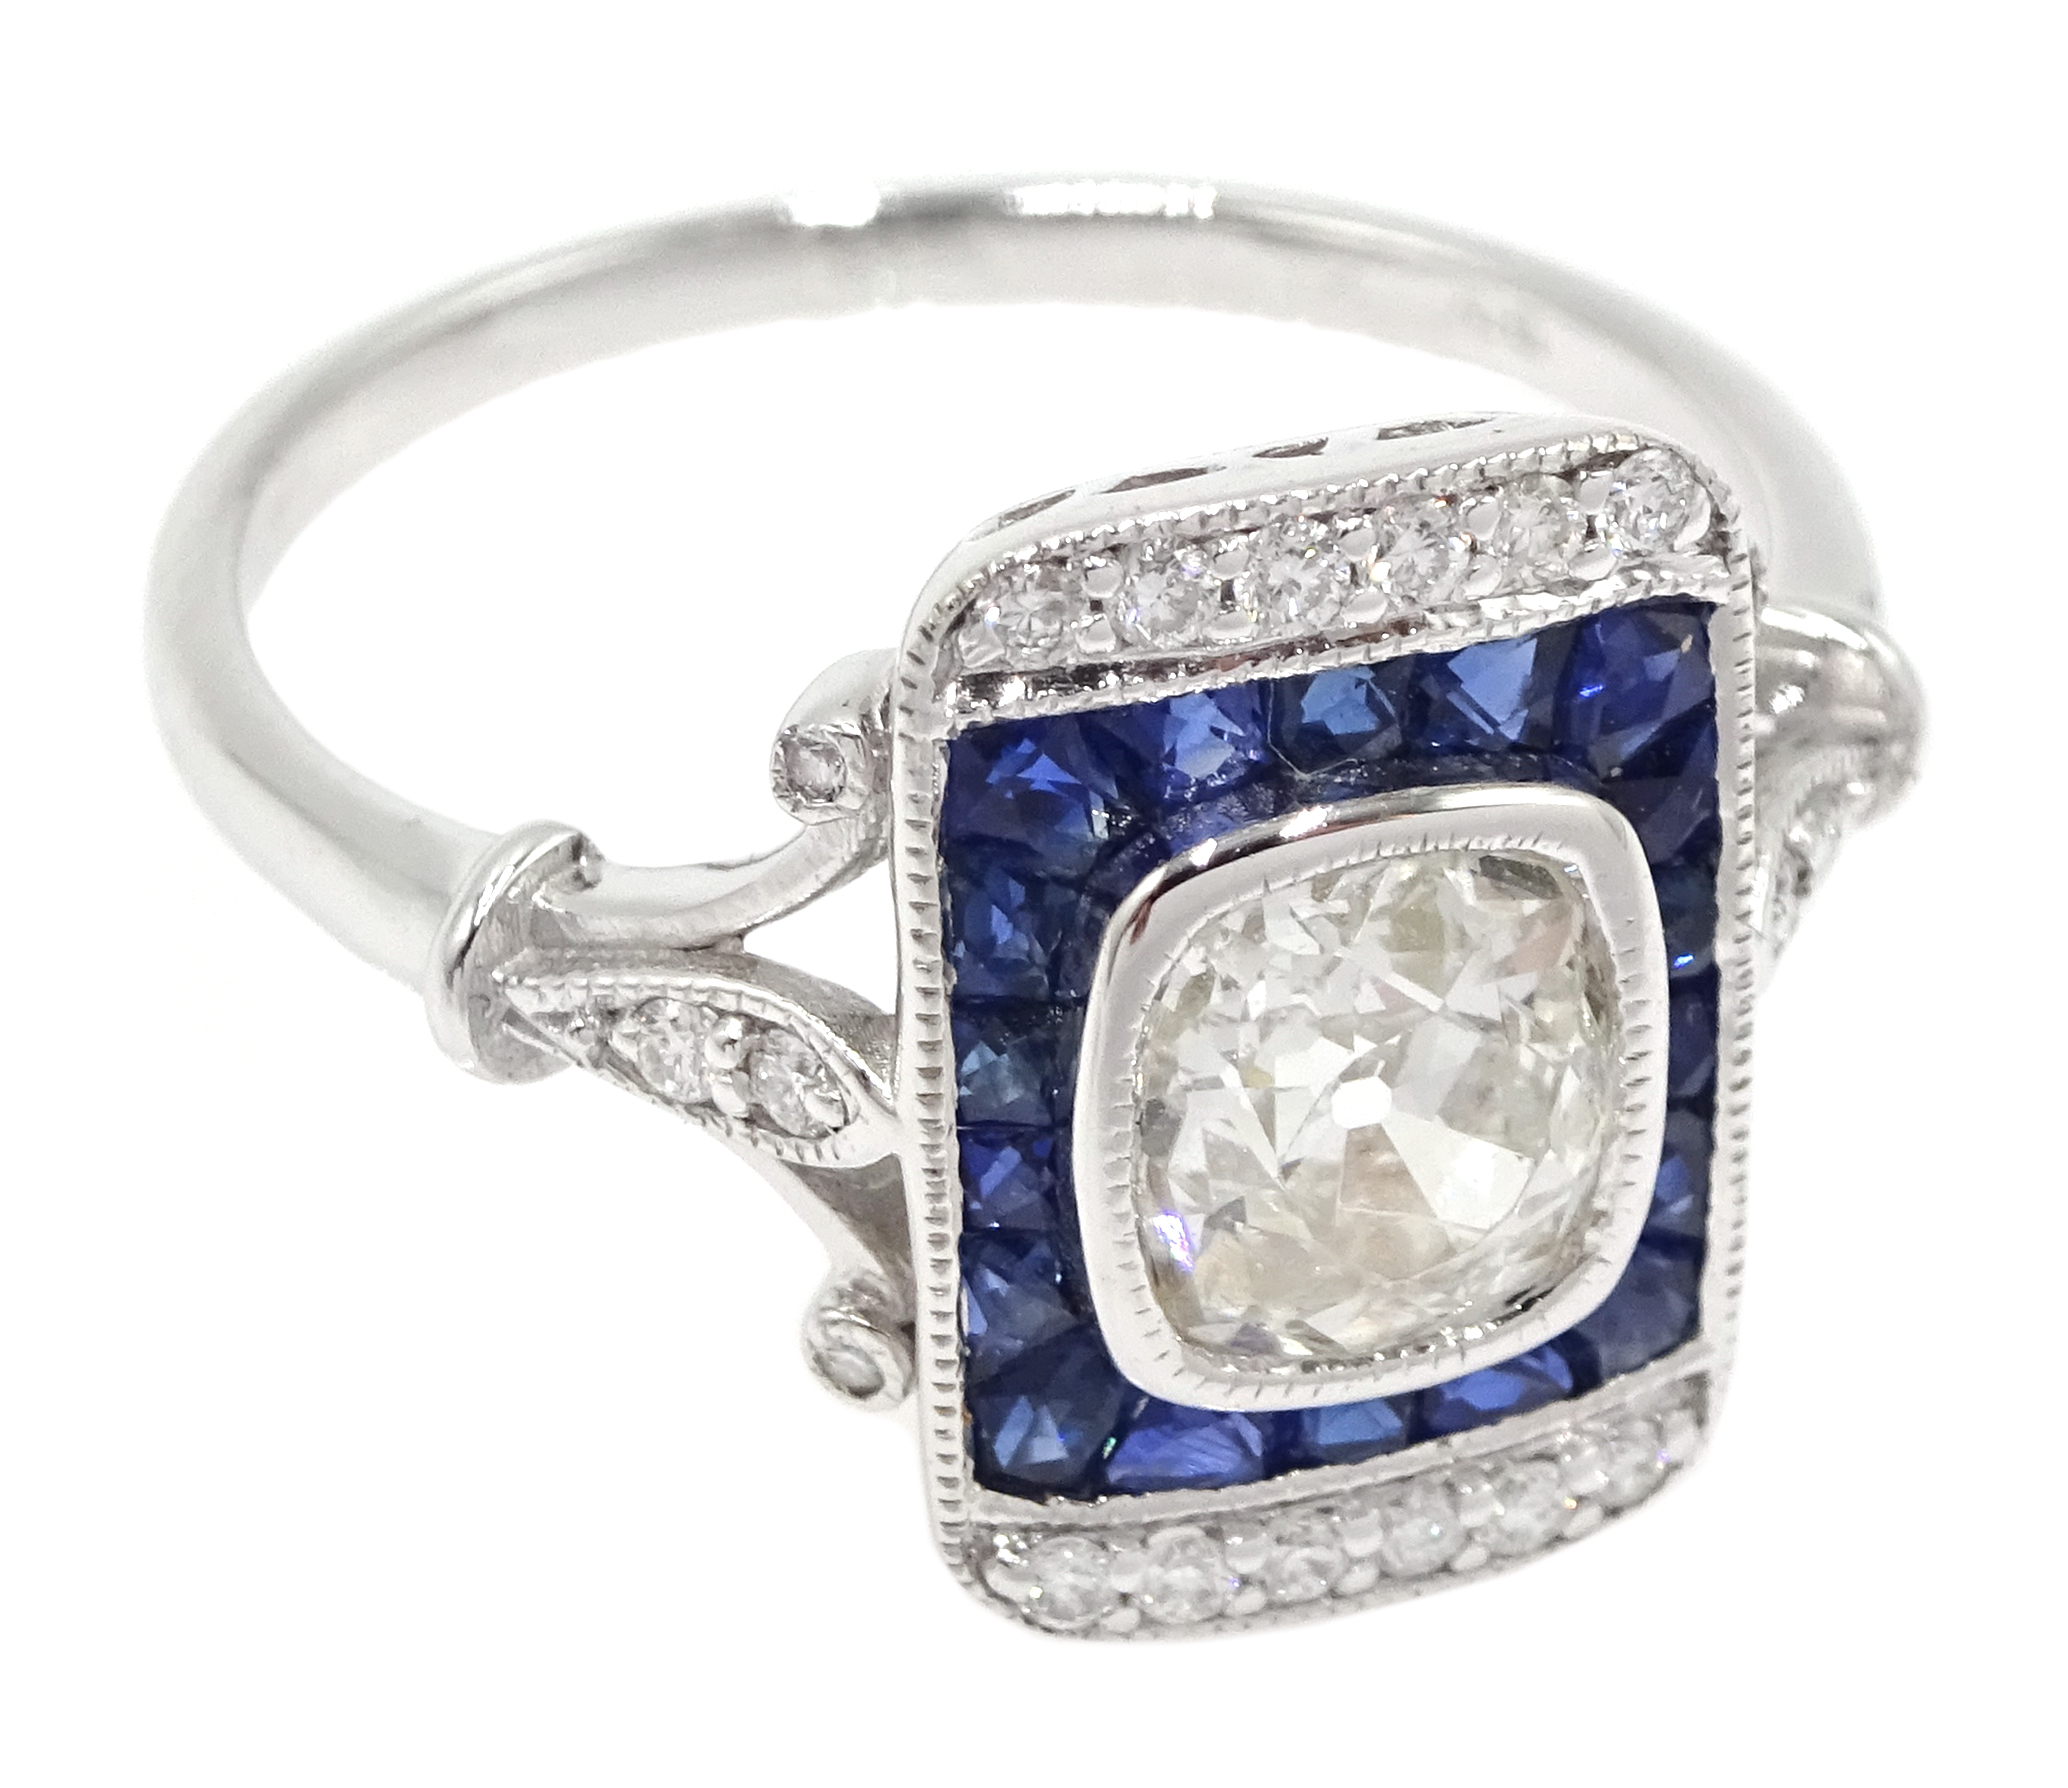 Art Deco style 18ct white gold, sapphire and diamond ring, central old cut diamond surrounded by sa - Image 3 of 6